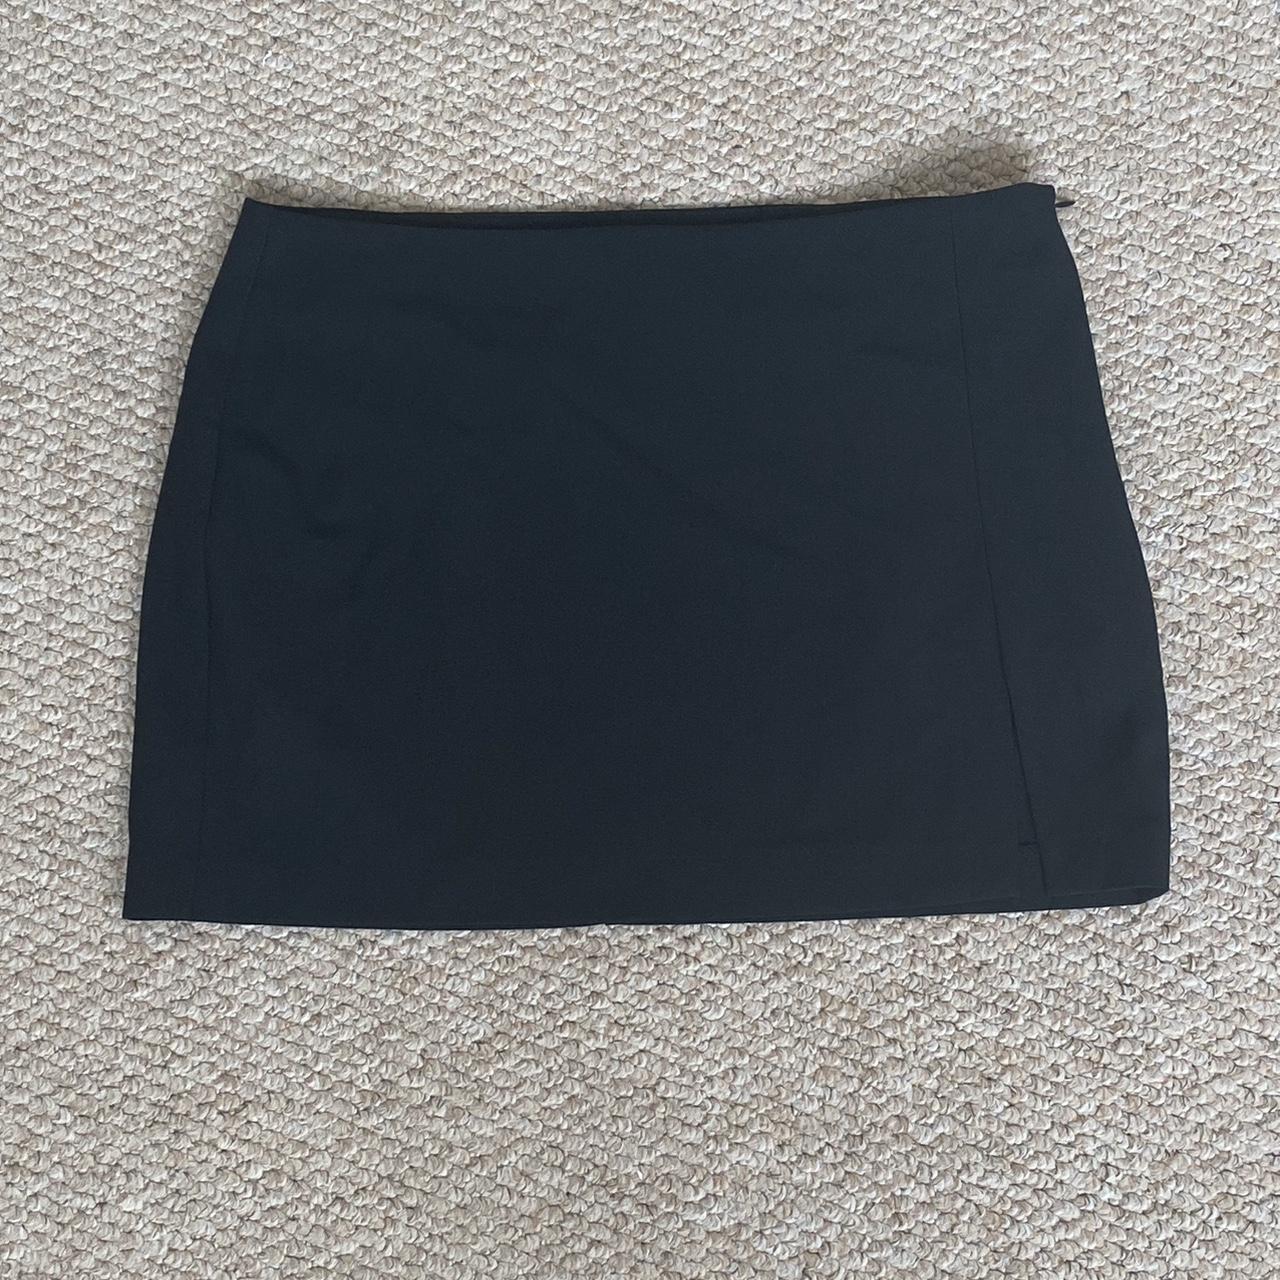 pull&bear black mini skirt with a slit in the side,... - Depop